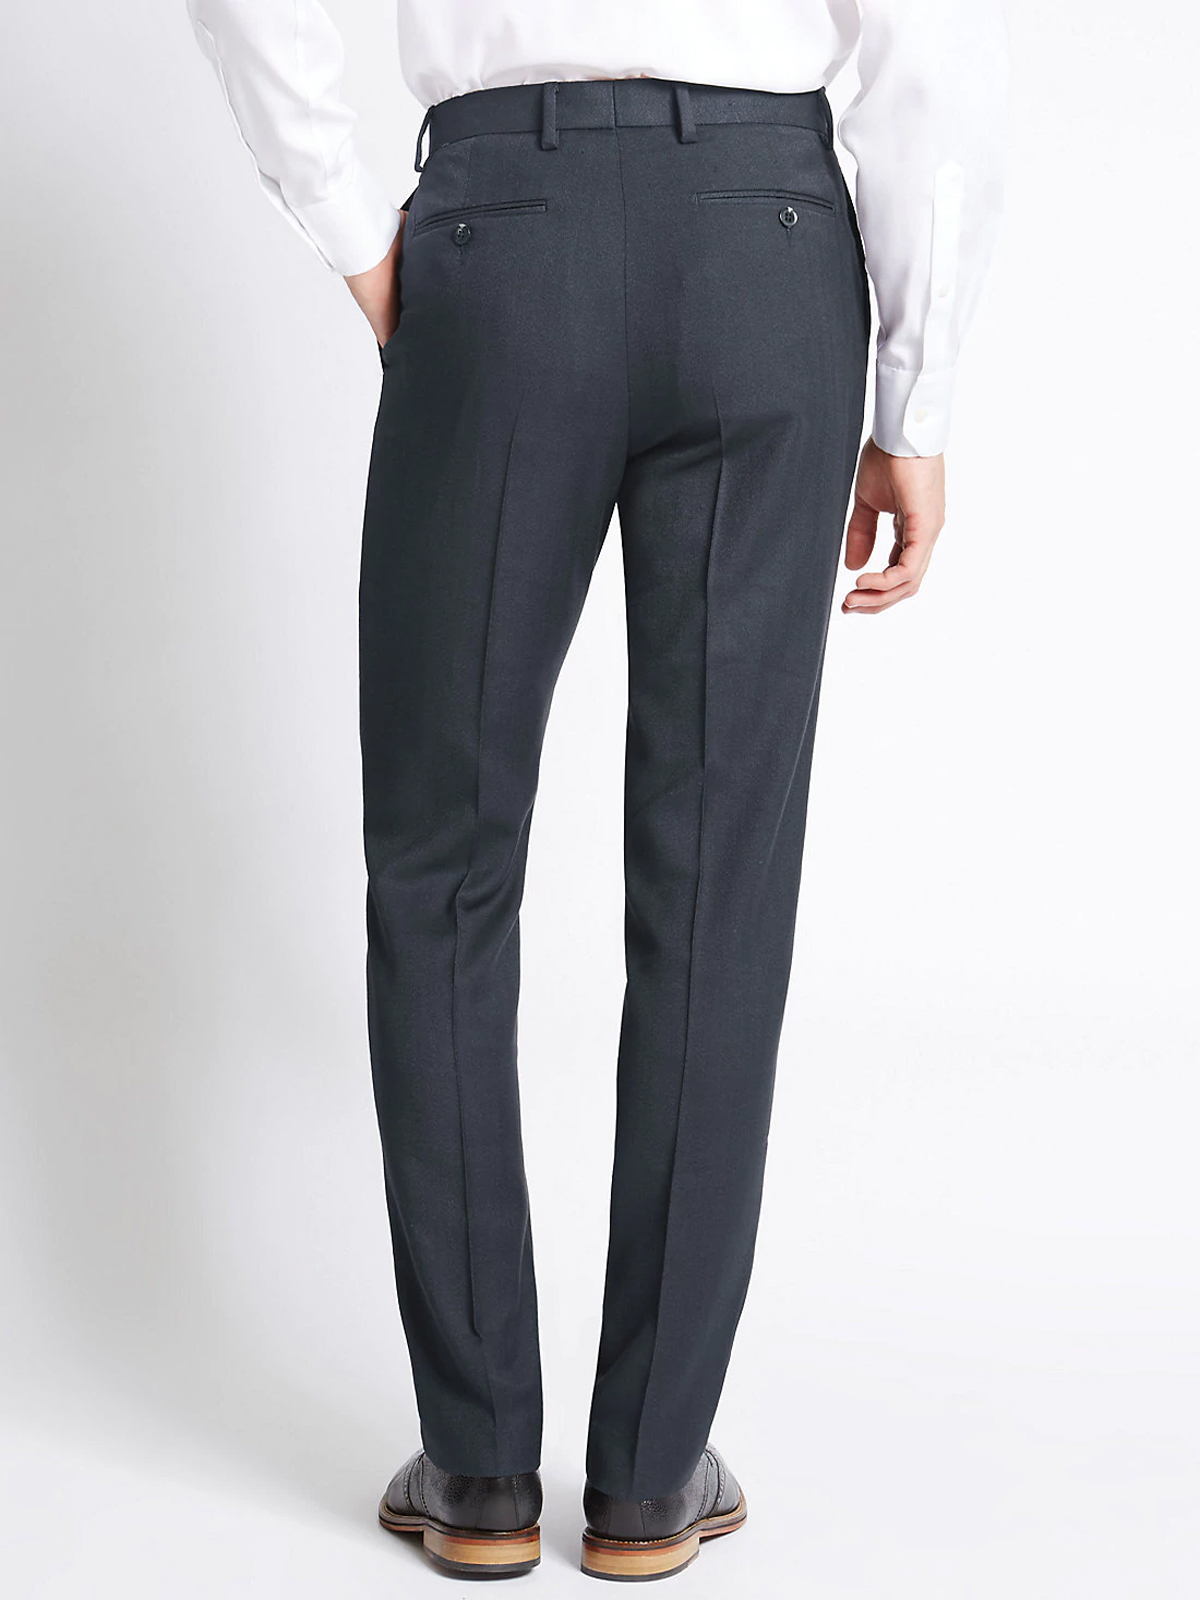 Marks and Spencer - - M&5 NAVY Tailored Fit Flat Front Trousers - Waist ...